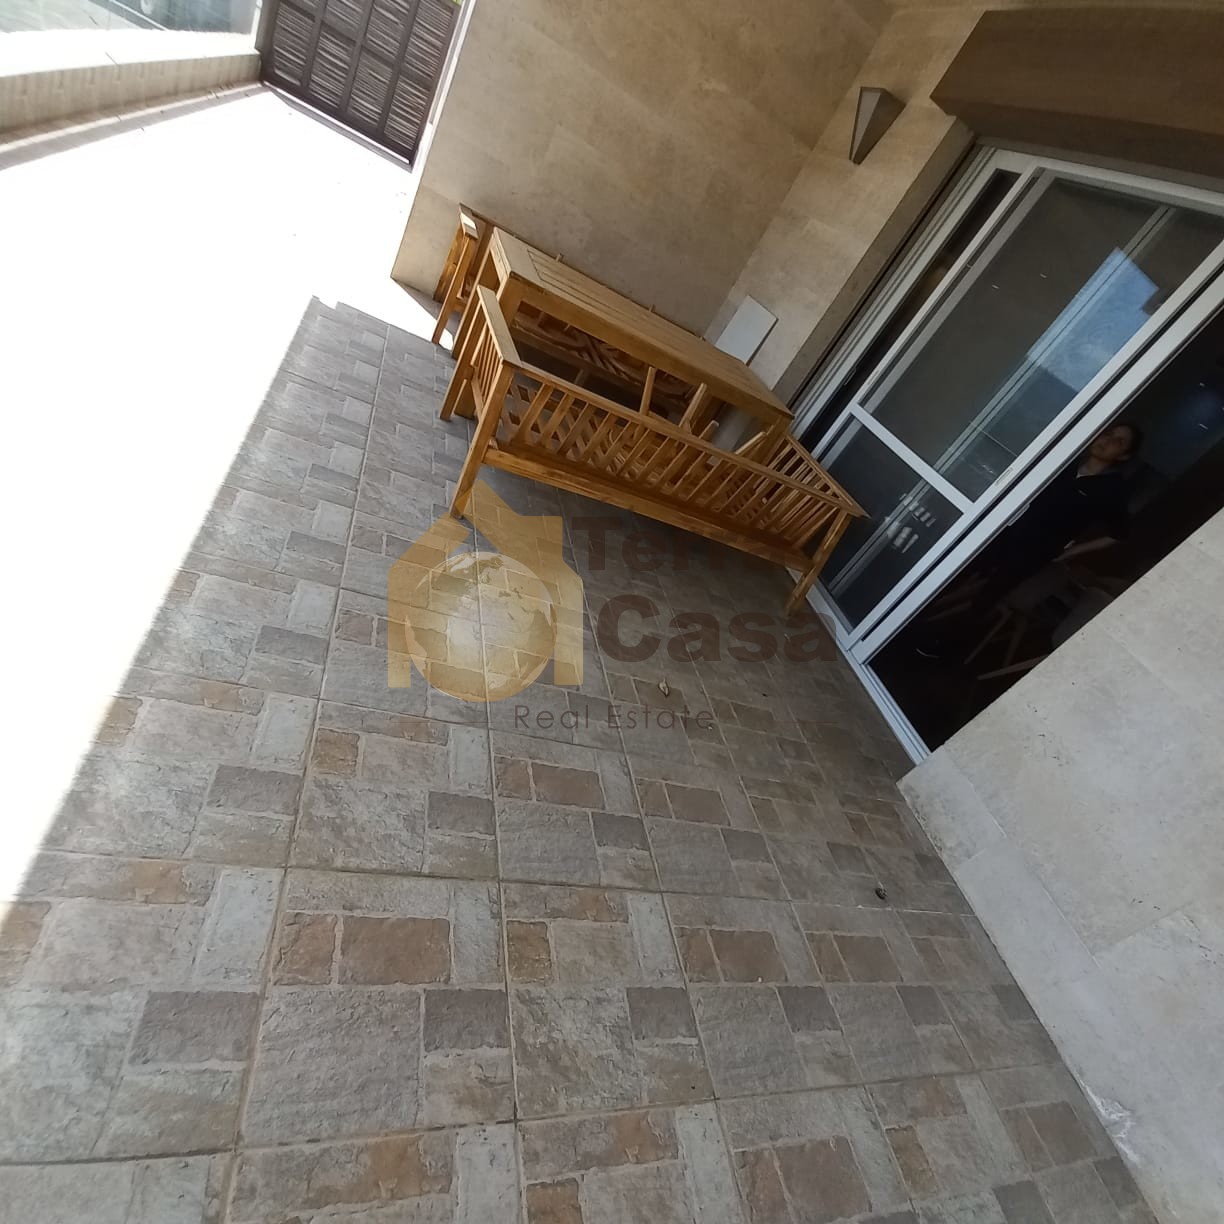 baabdat furnished apartment 100 sqm terrace shared pool and gym